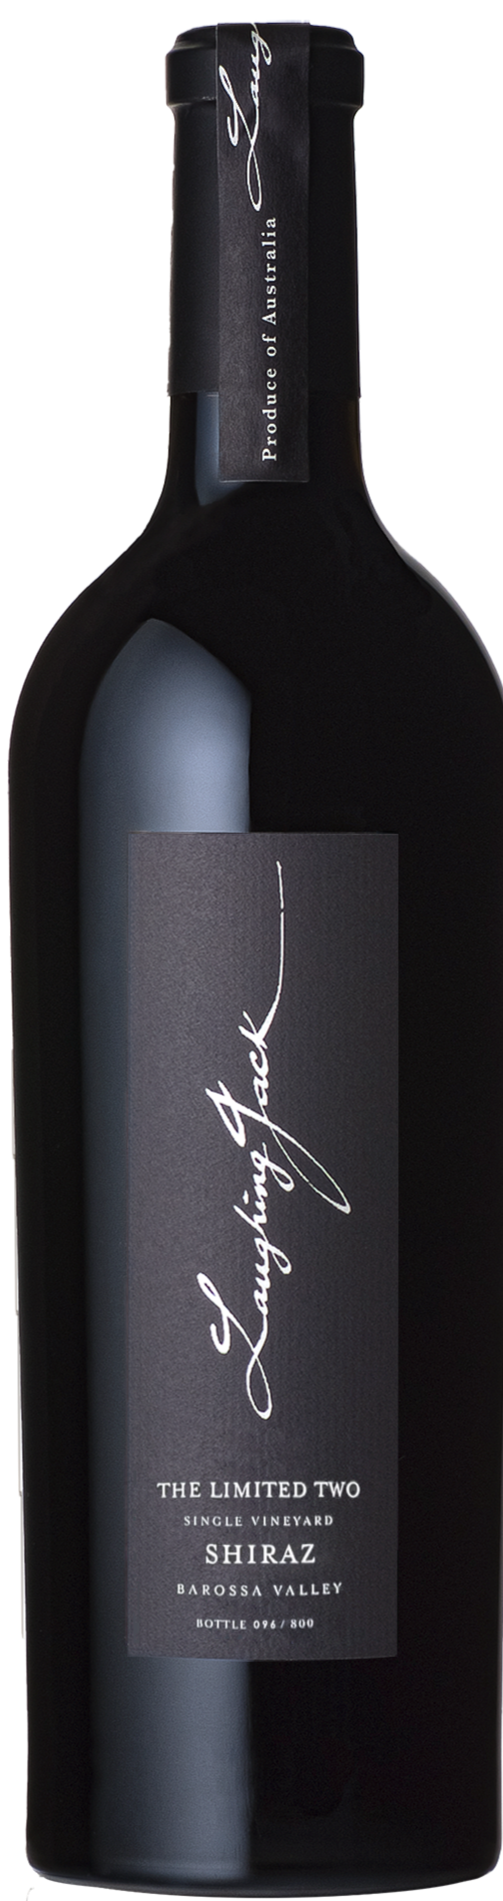 Laughing Jack The Limited Two Shiraz 2016